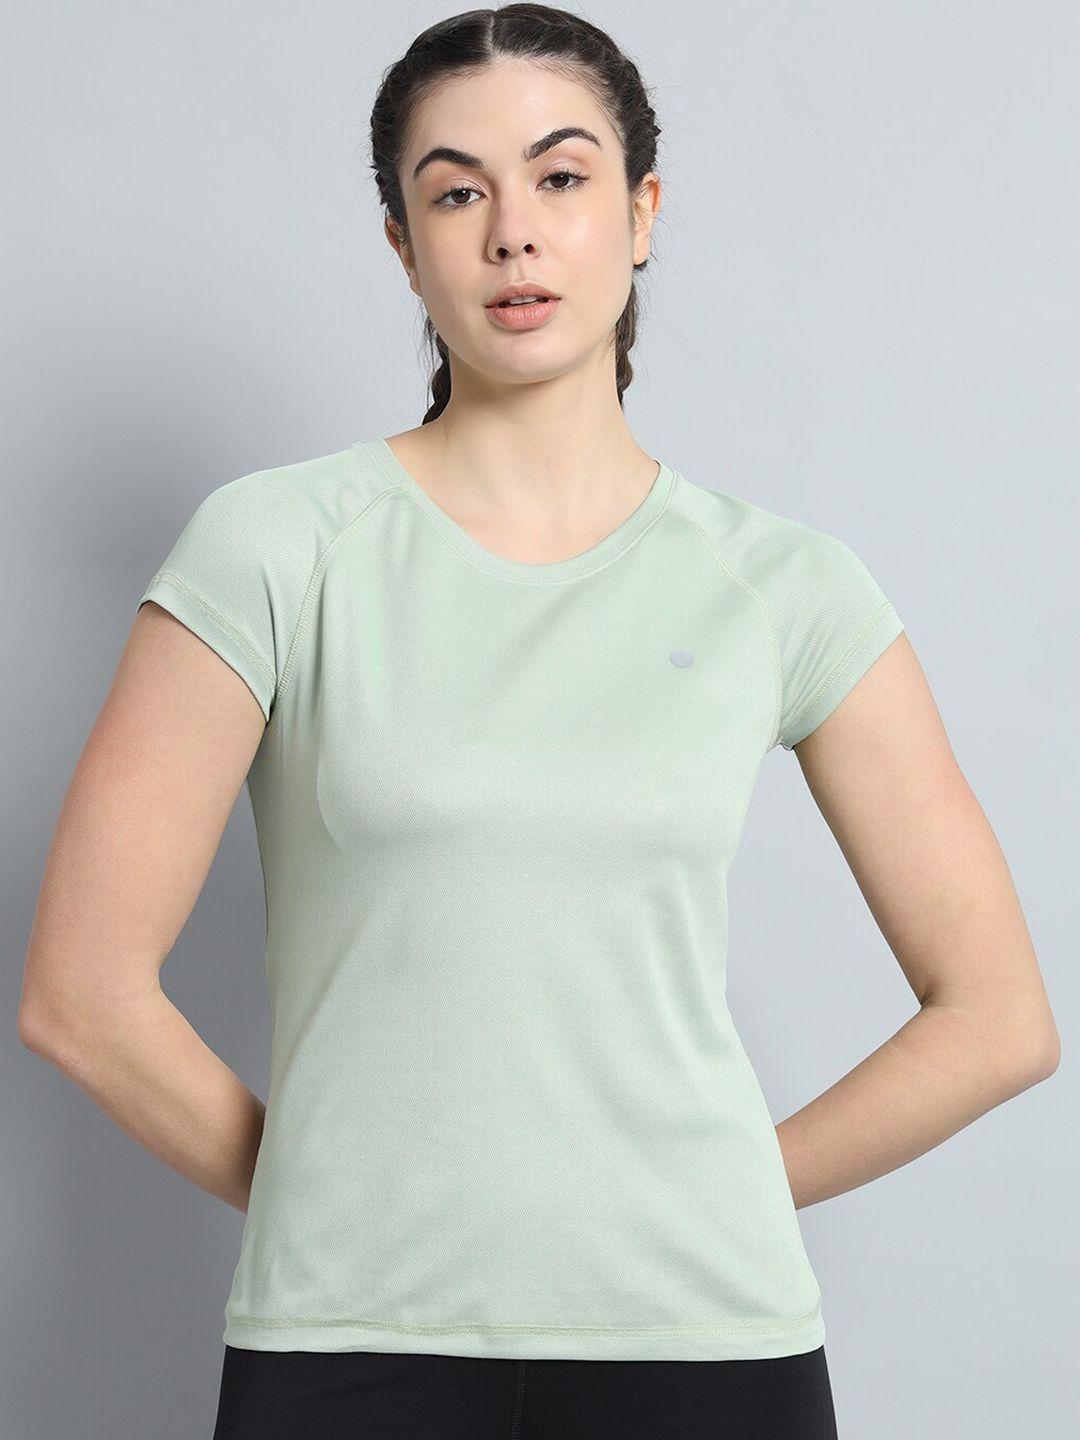 athlisis women olive green e-dry cut outs slim fit t-shirt